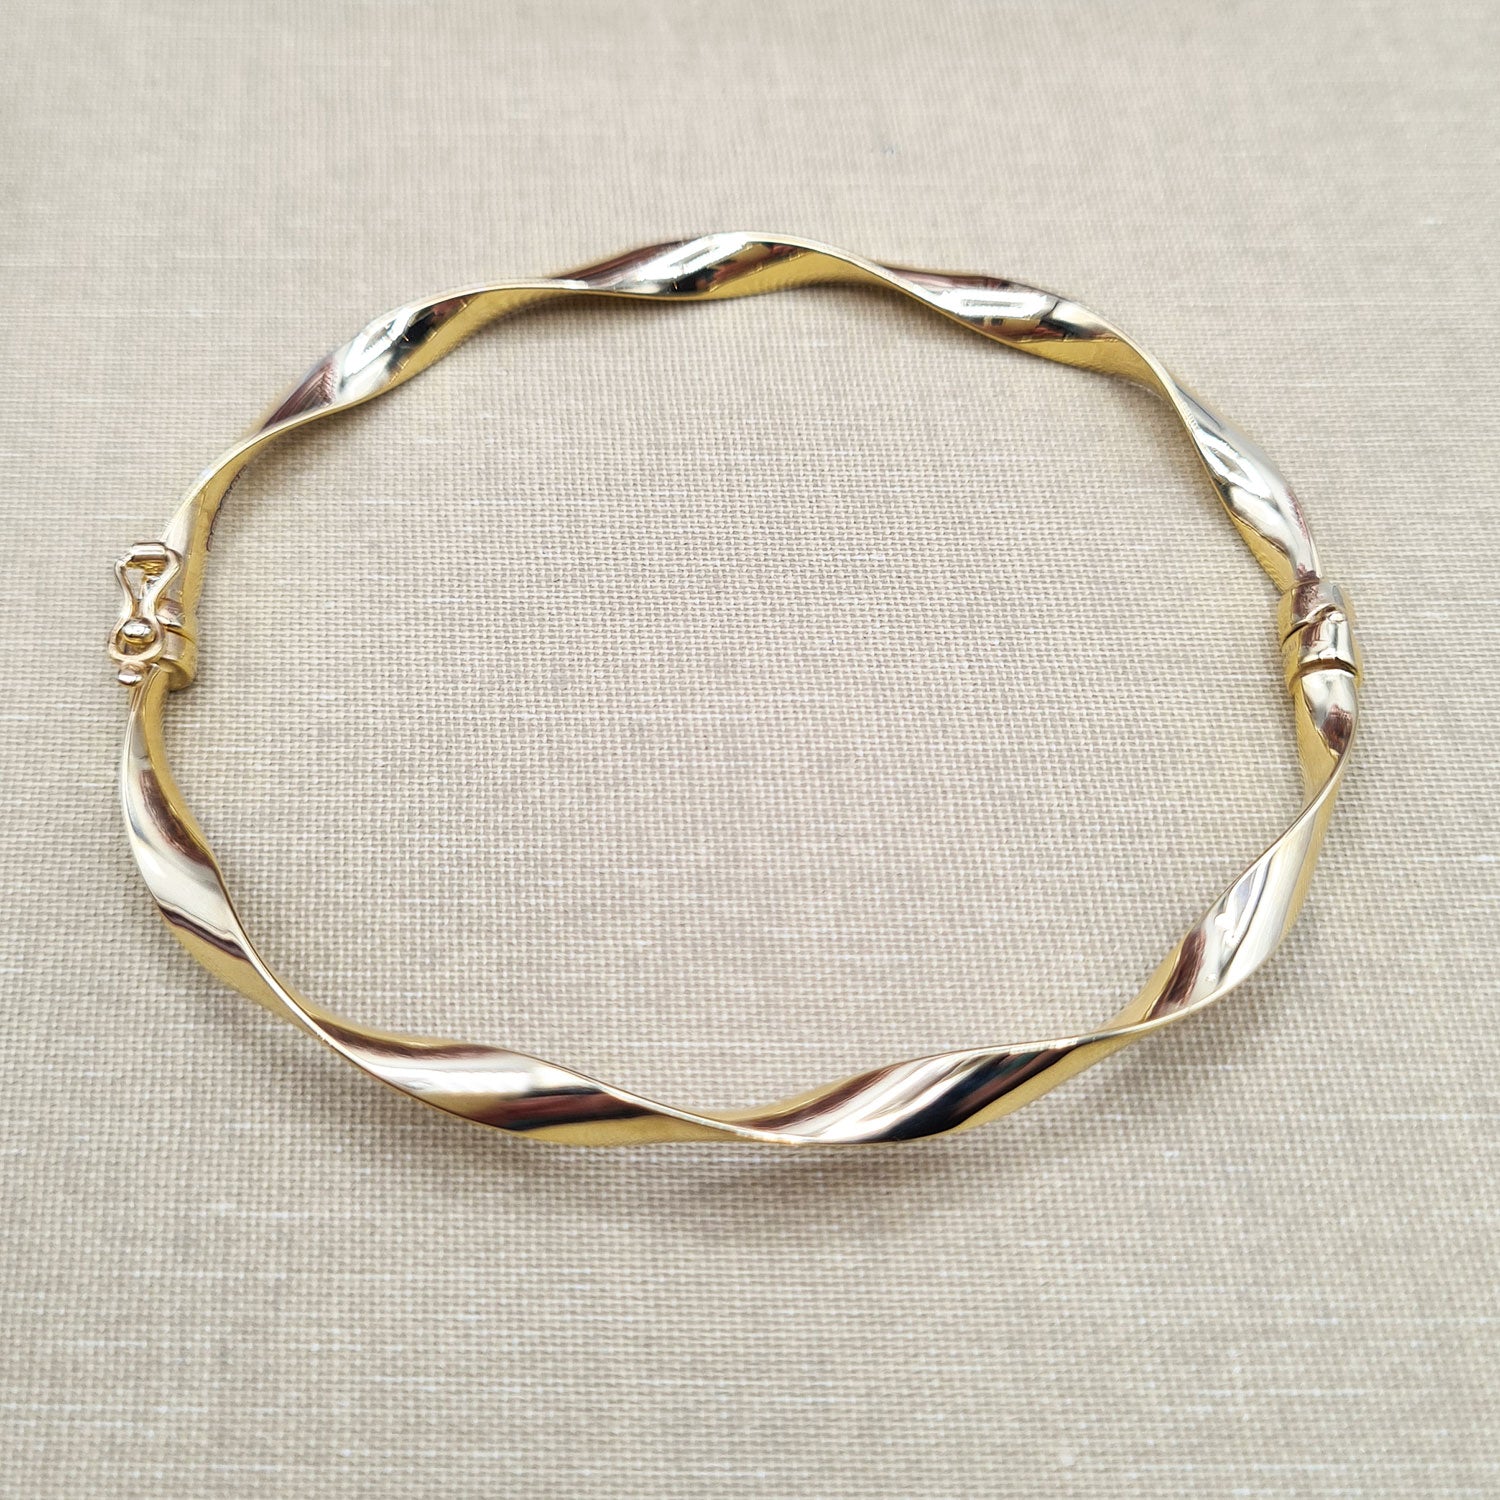 ladies twist bangle made from 9ct yellow gold